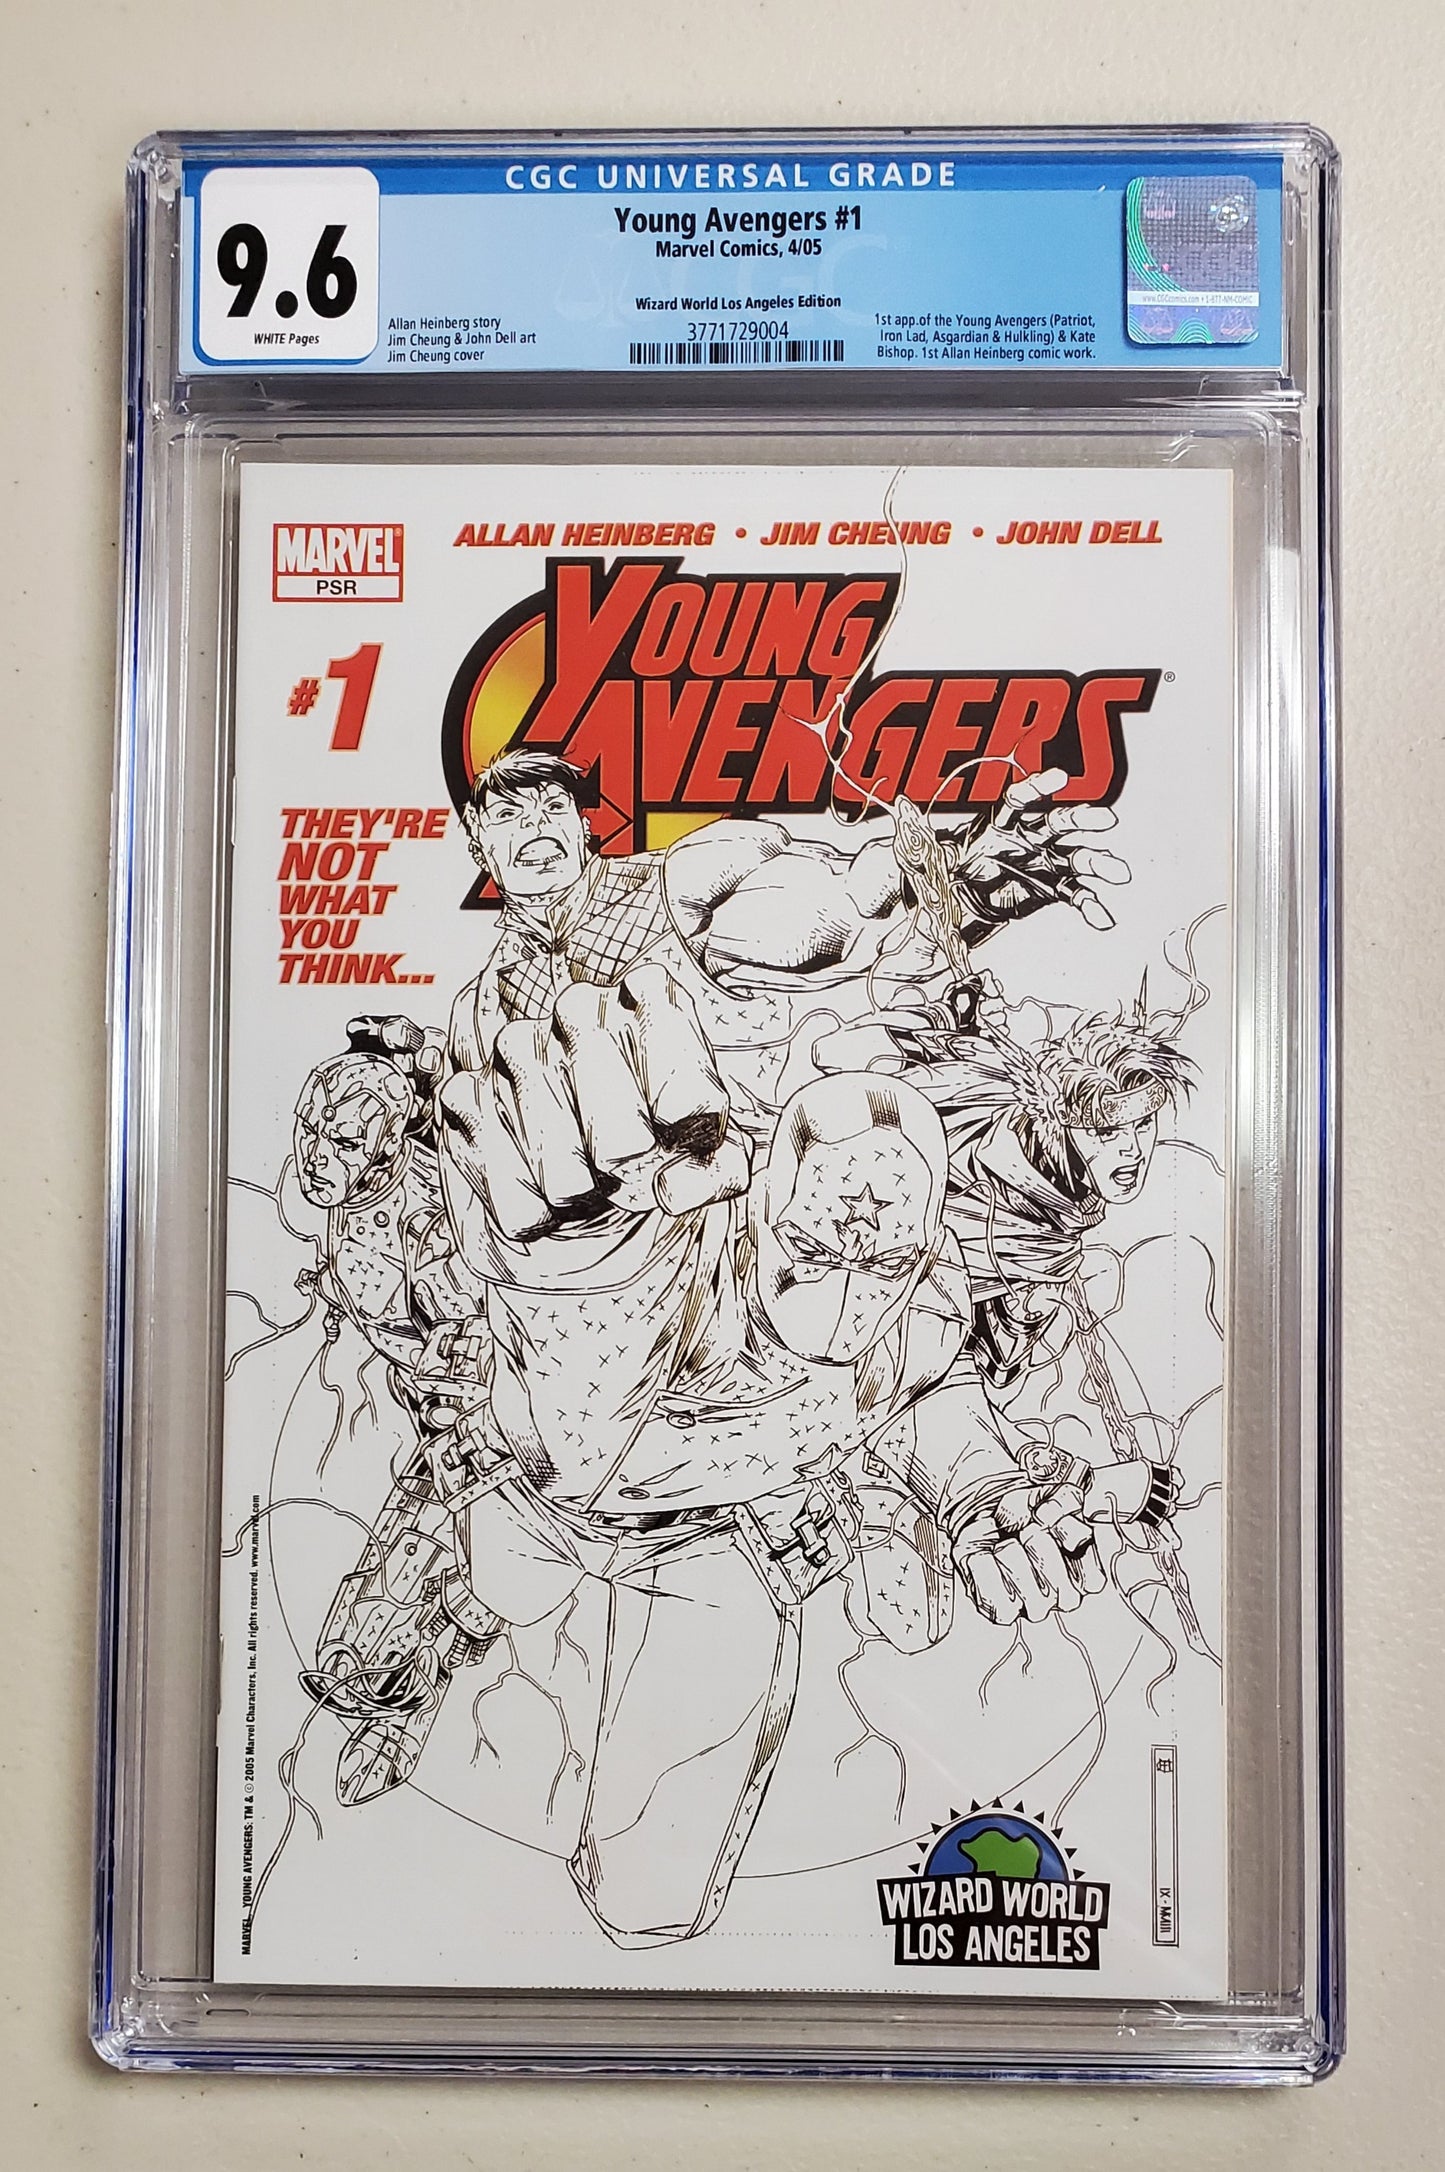 9.6 CGC YOUNG AVENGERS #1 WIZARD WORLD LOS ANGELES (1ST APP YOUNG AVENGERS) 2005 [3771729004]